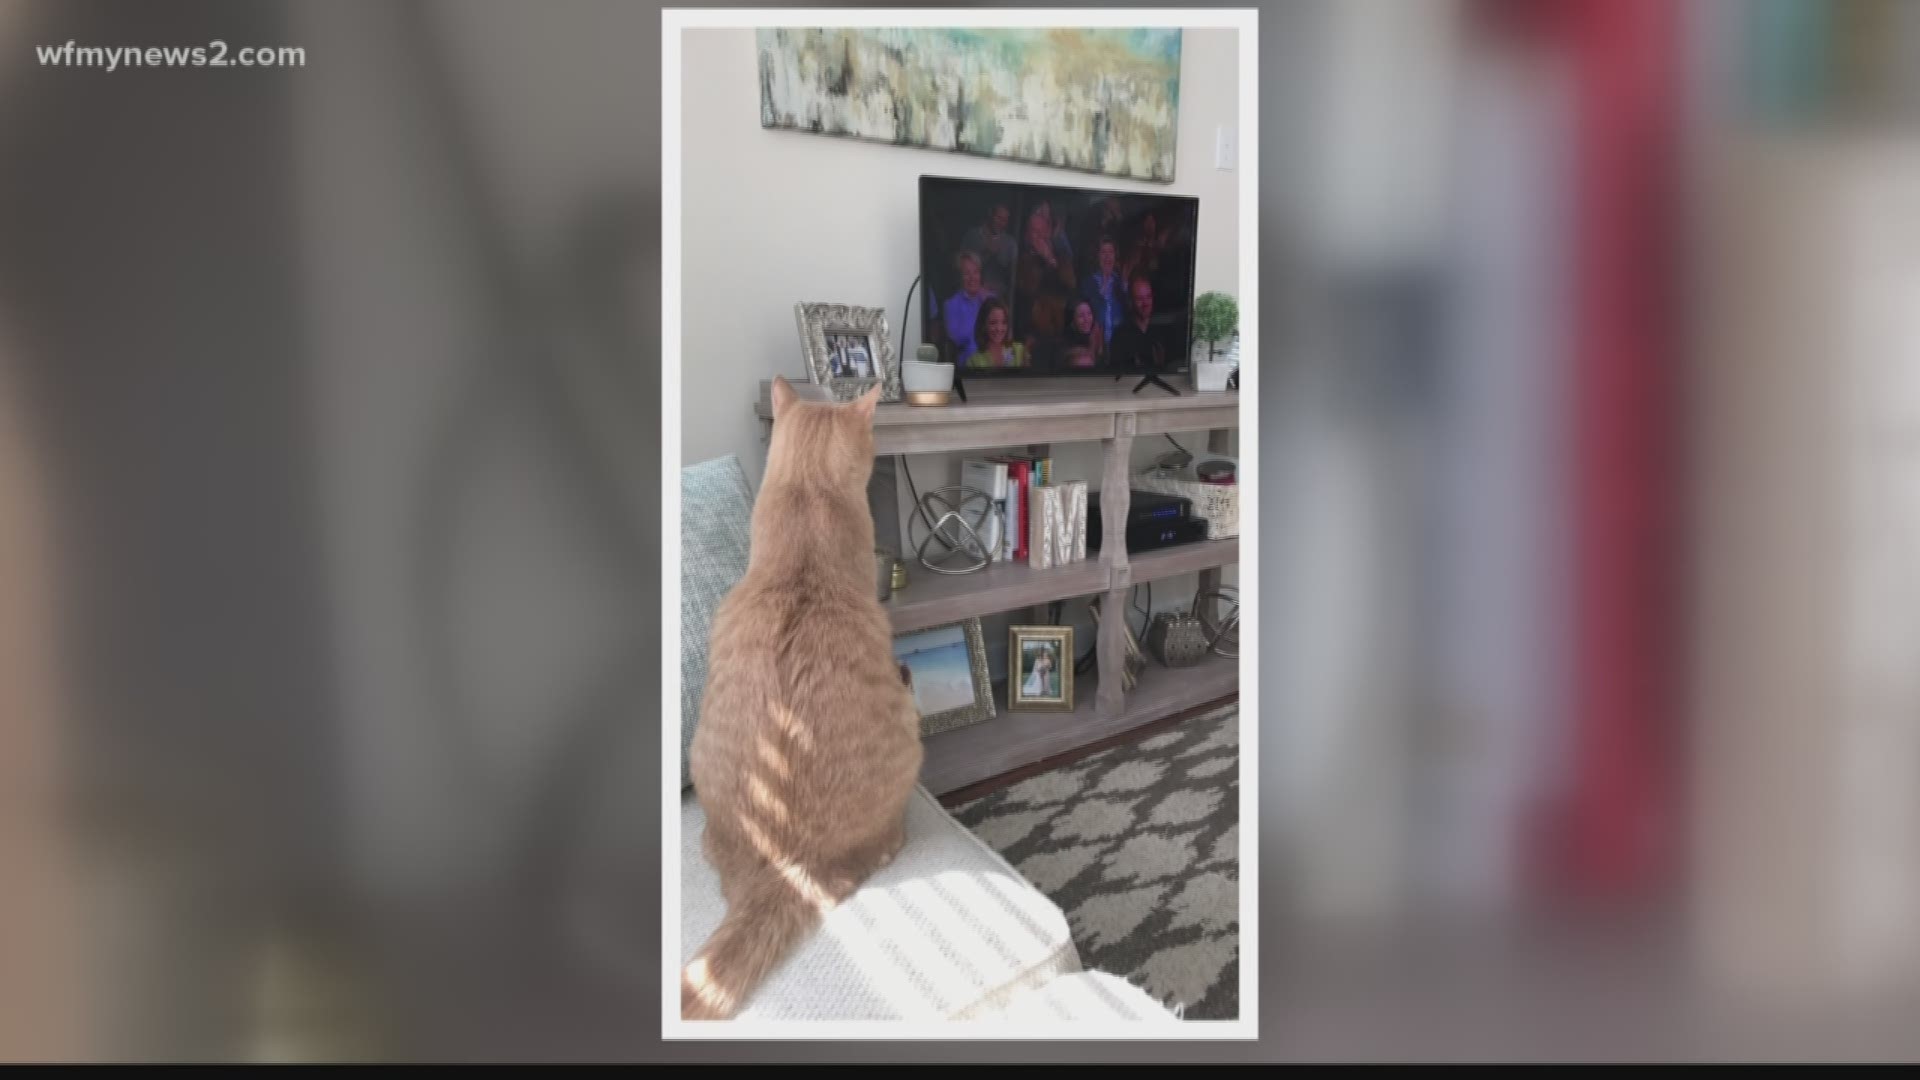 Have you ever caught your pet watching TV?